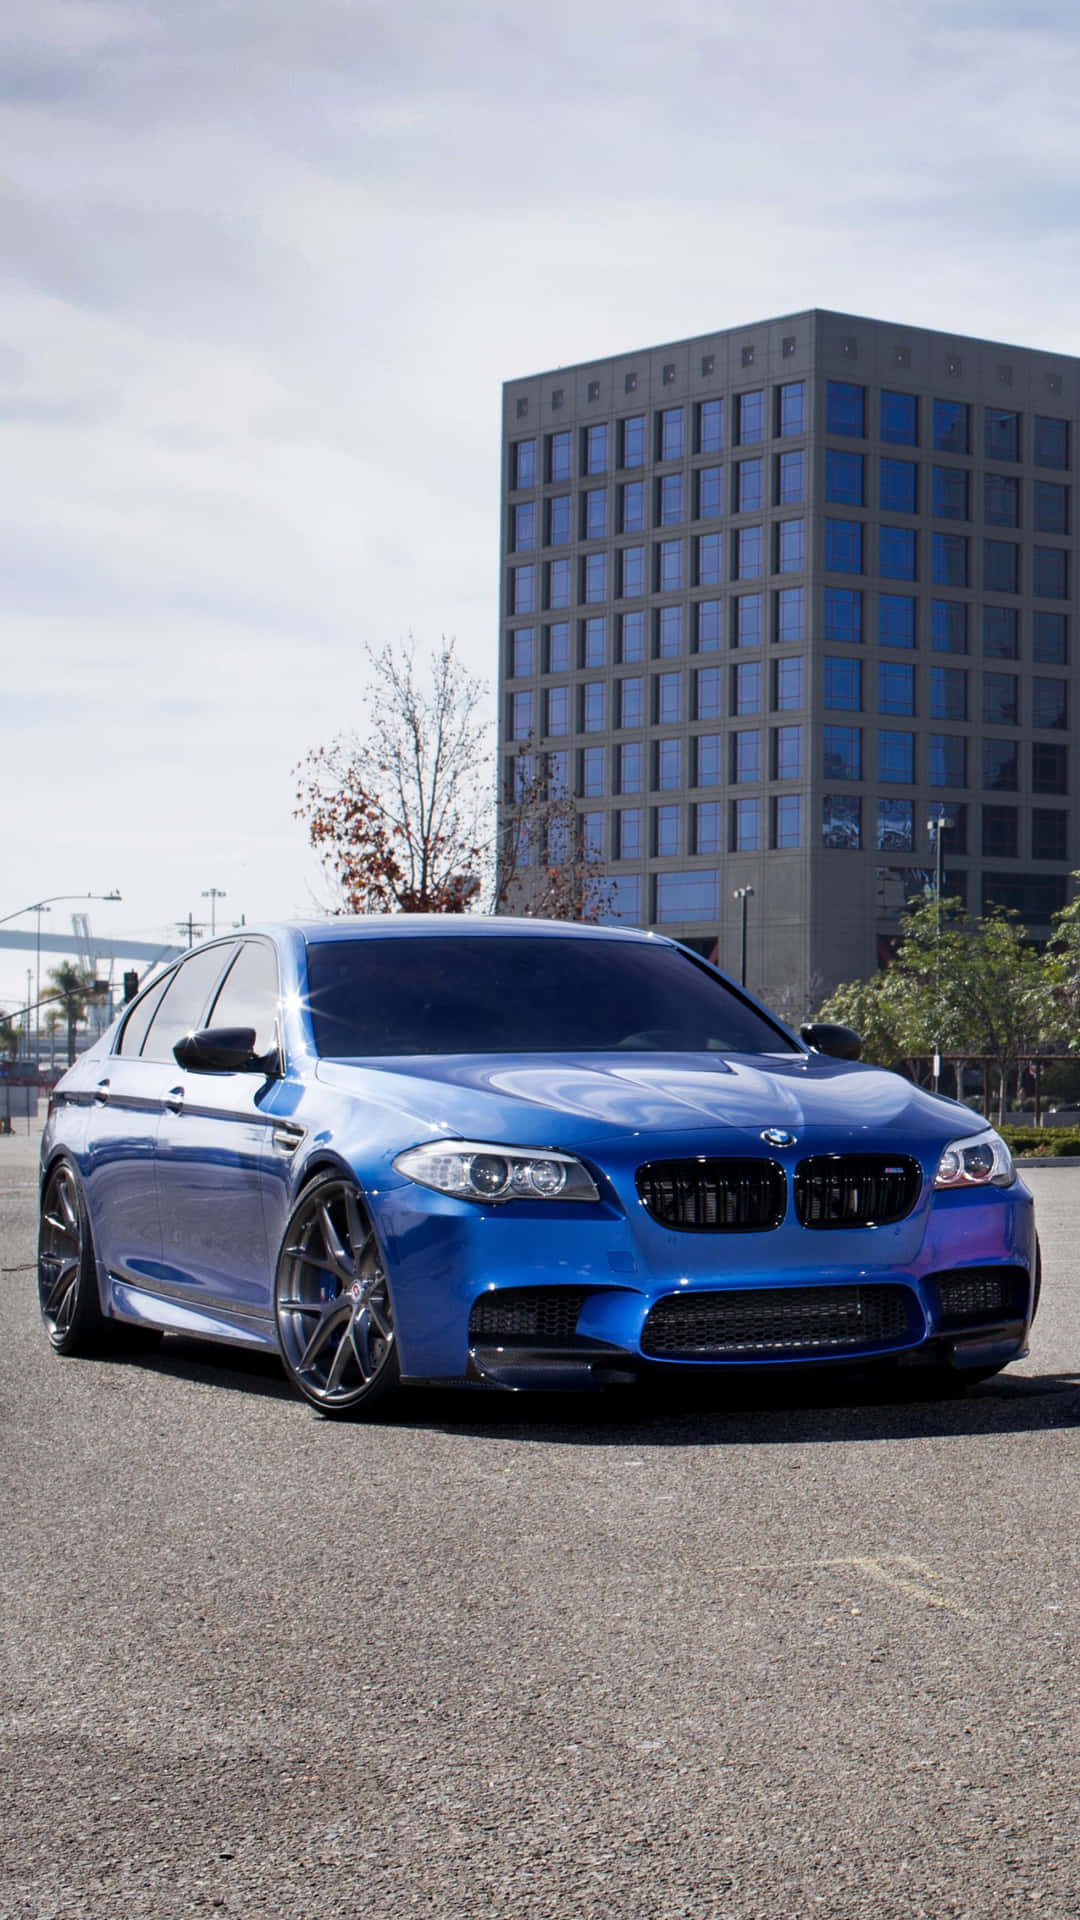 Show Off Your Style With The Bmw Iphone Background